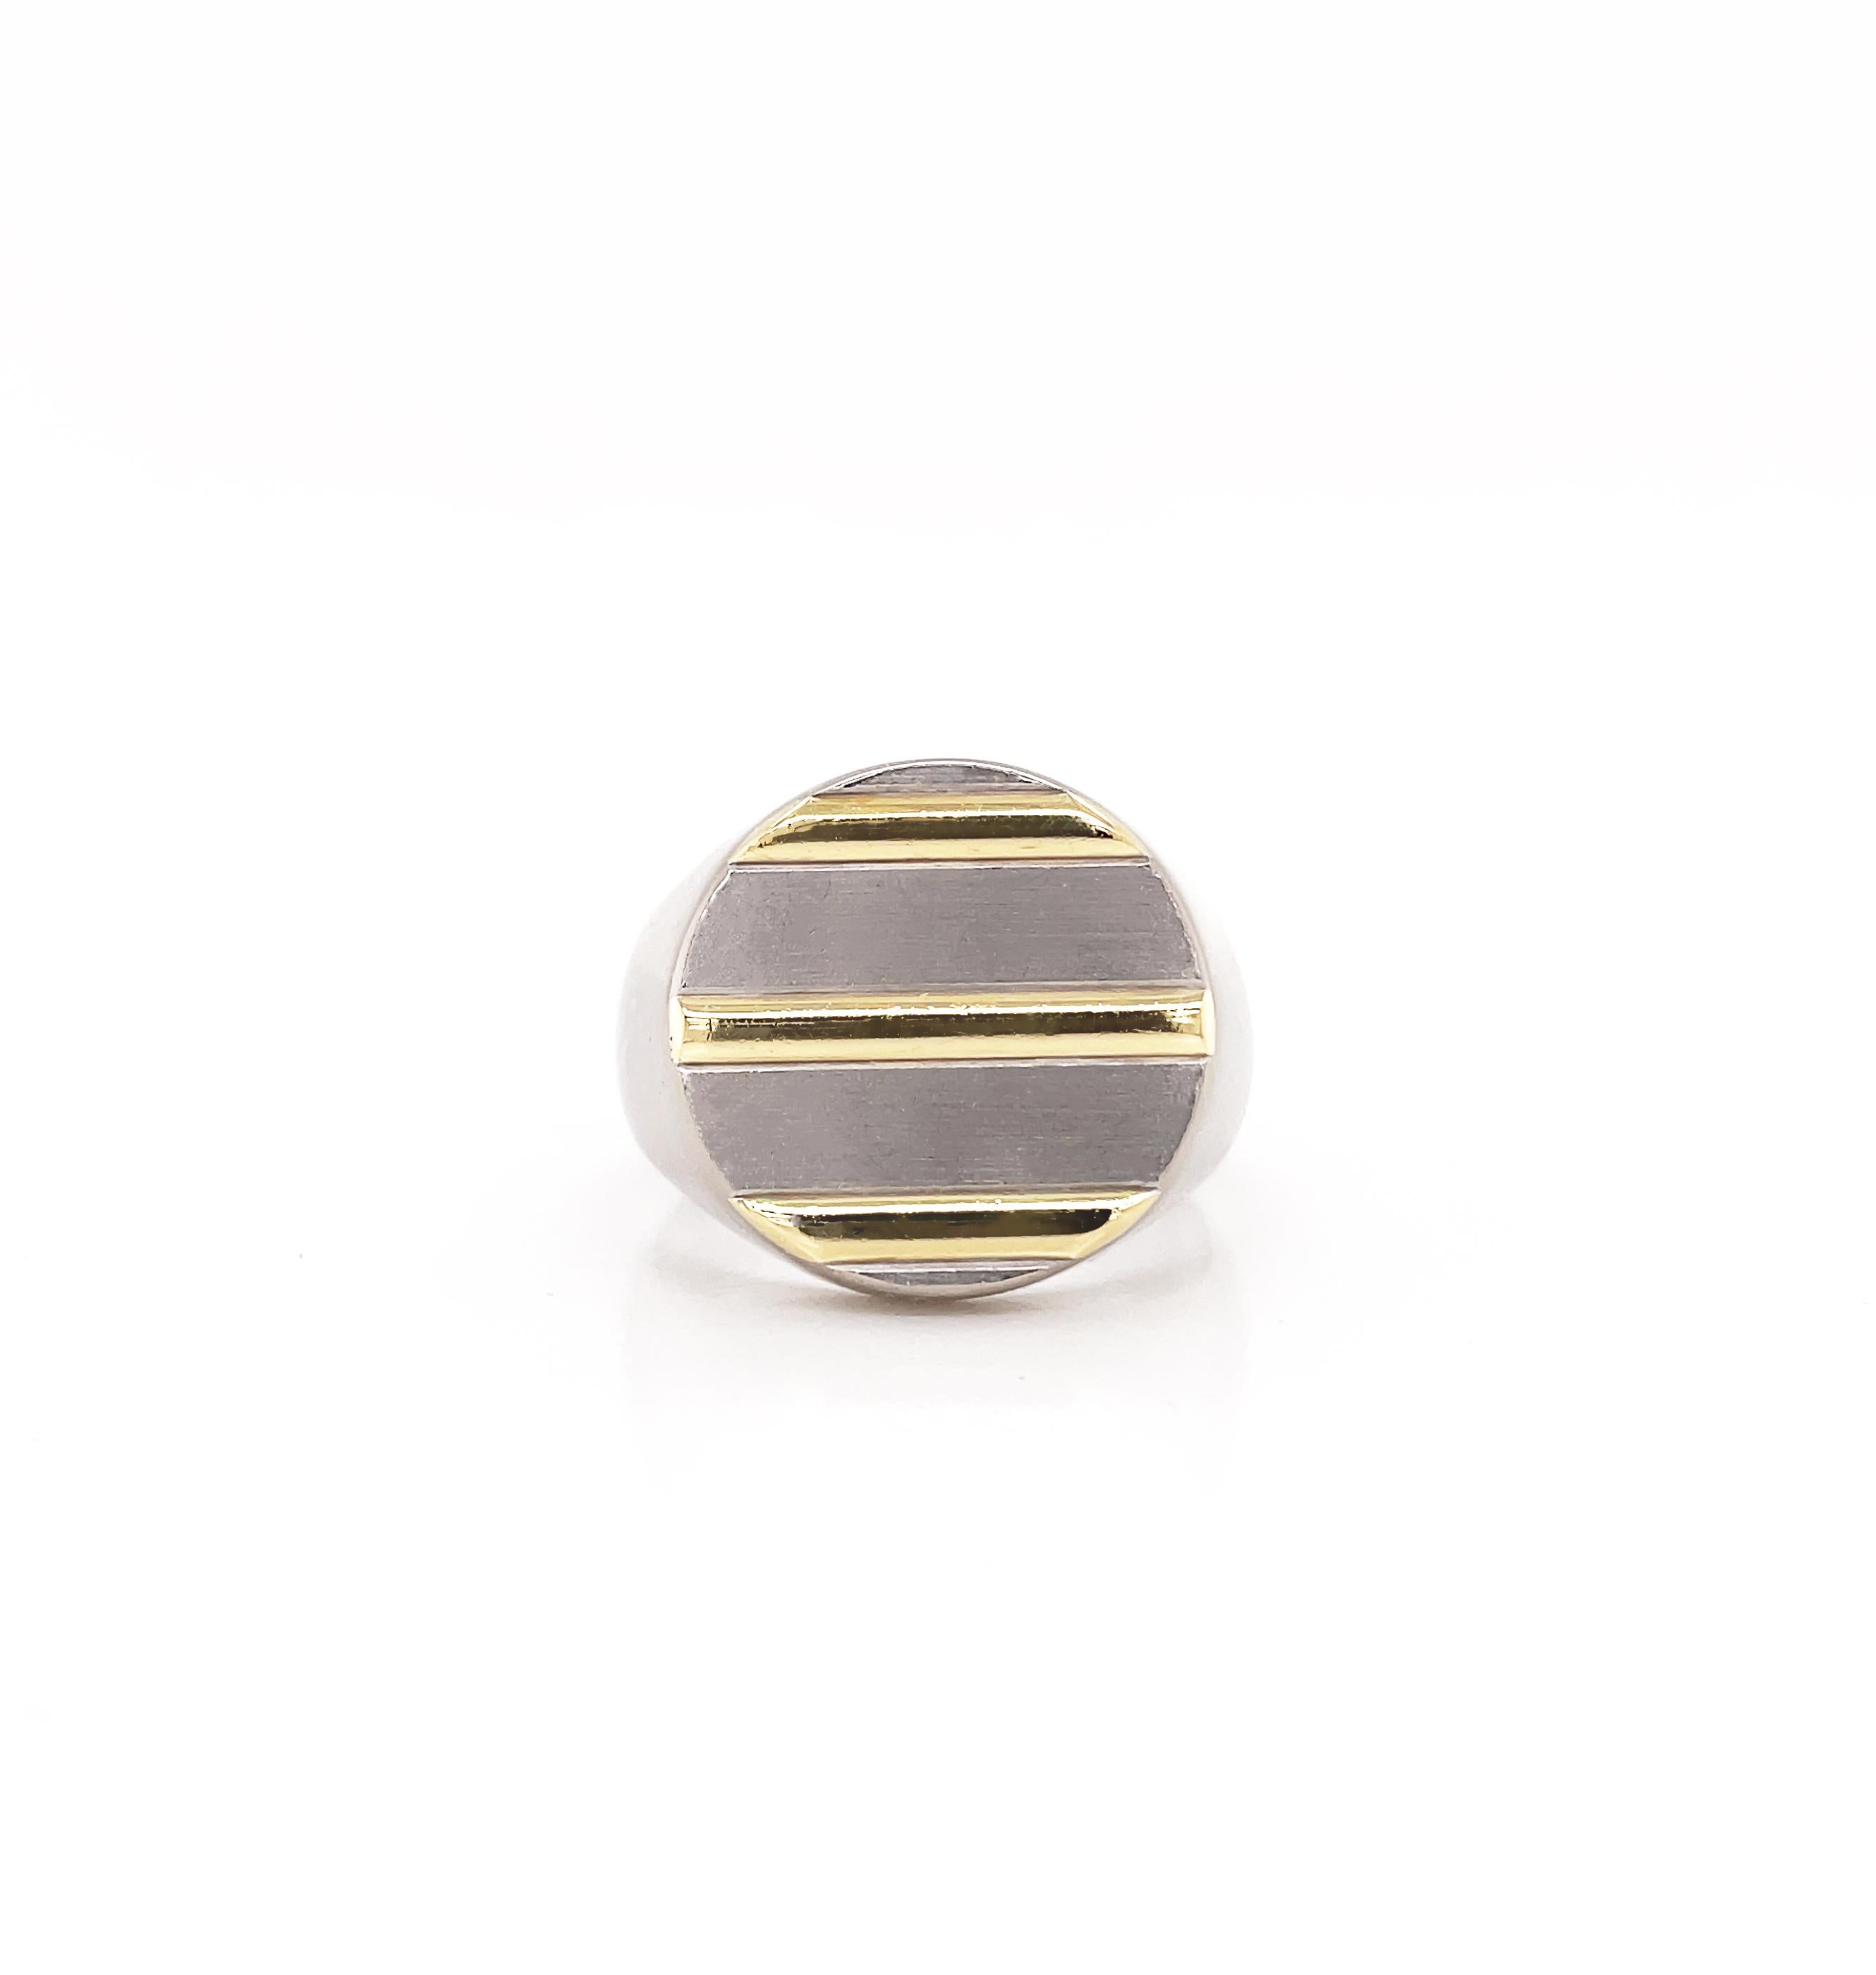 1980's 18 carat gold Piaget signet ring designed from their signature Polo collection. The ring is made in white gold with the face decorated with contrasting raised yellow gold stripes.  Measuring 17.5mm at its front, tapering to 5.3mm at the back.